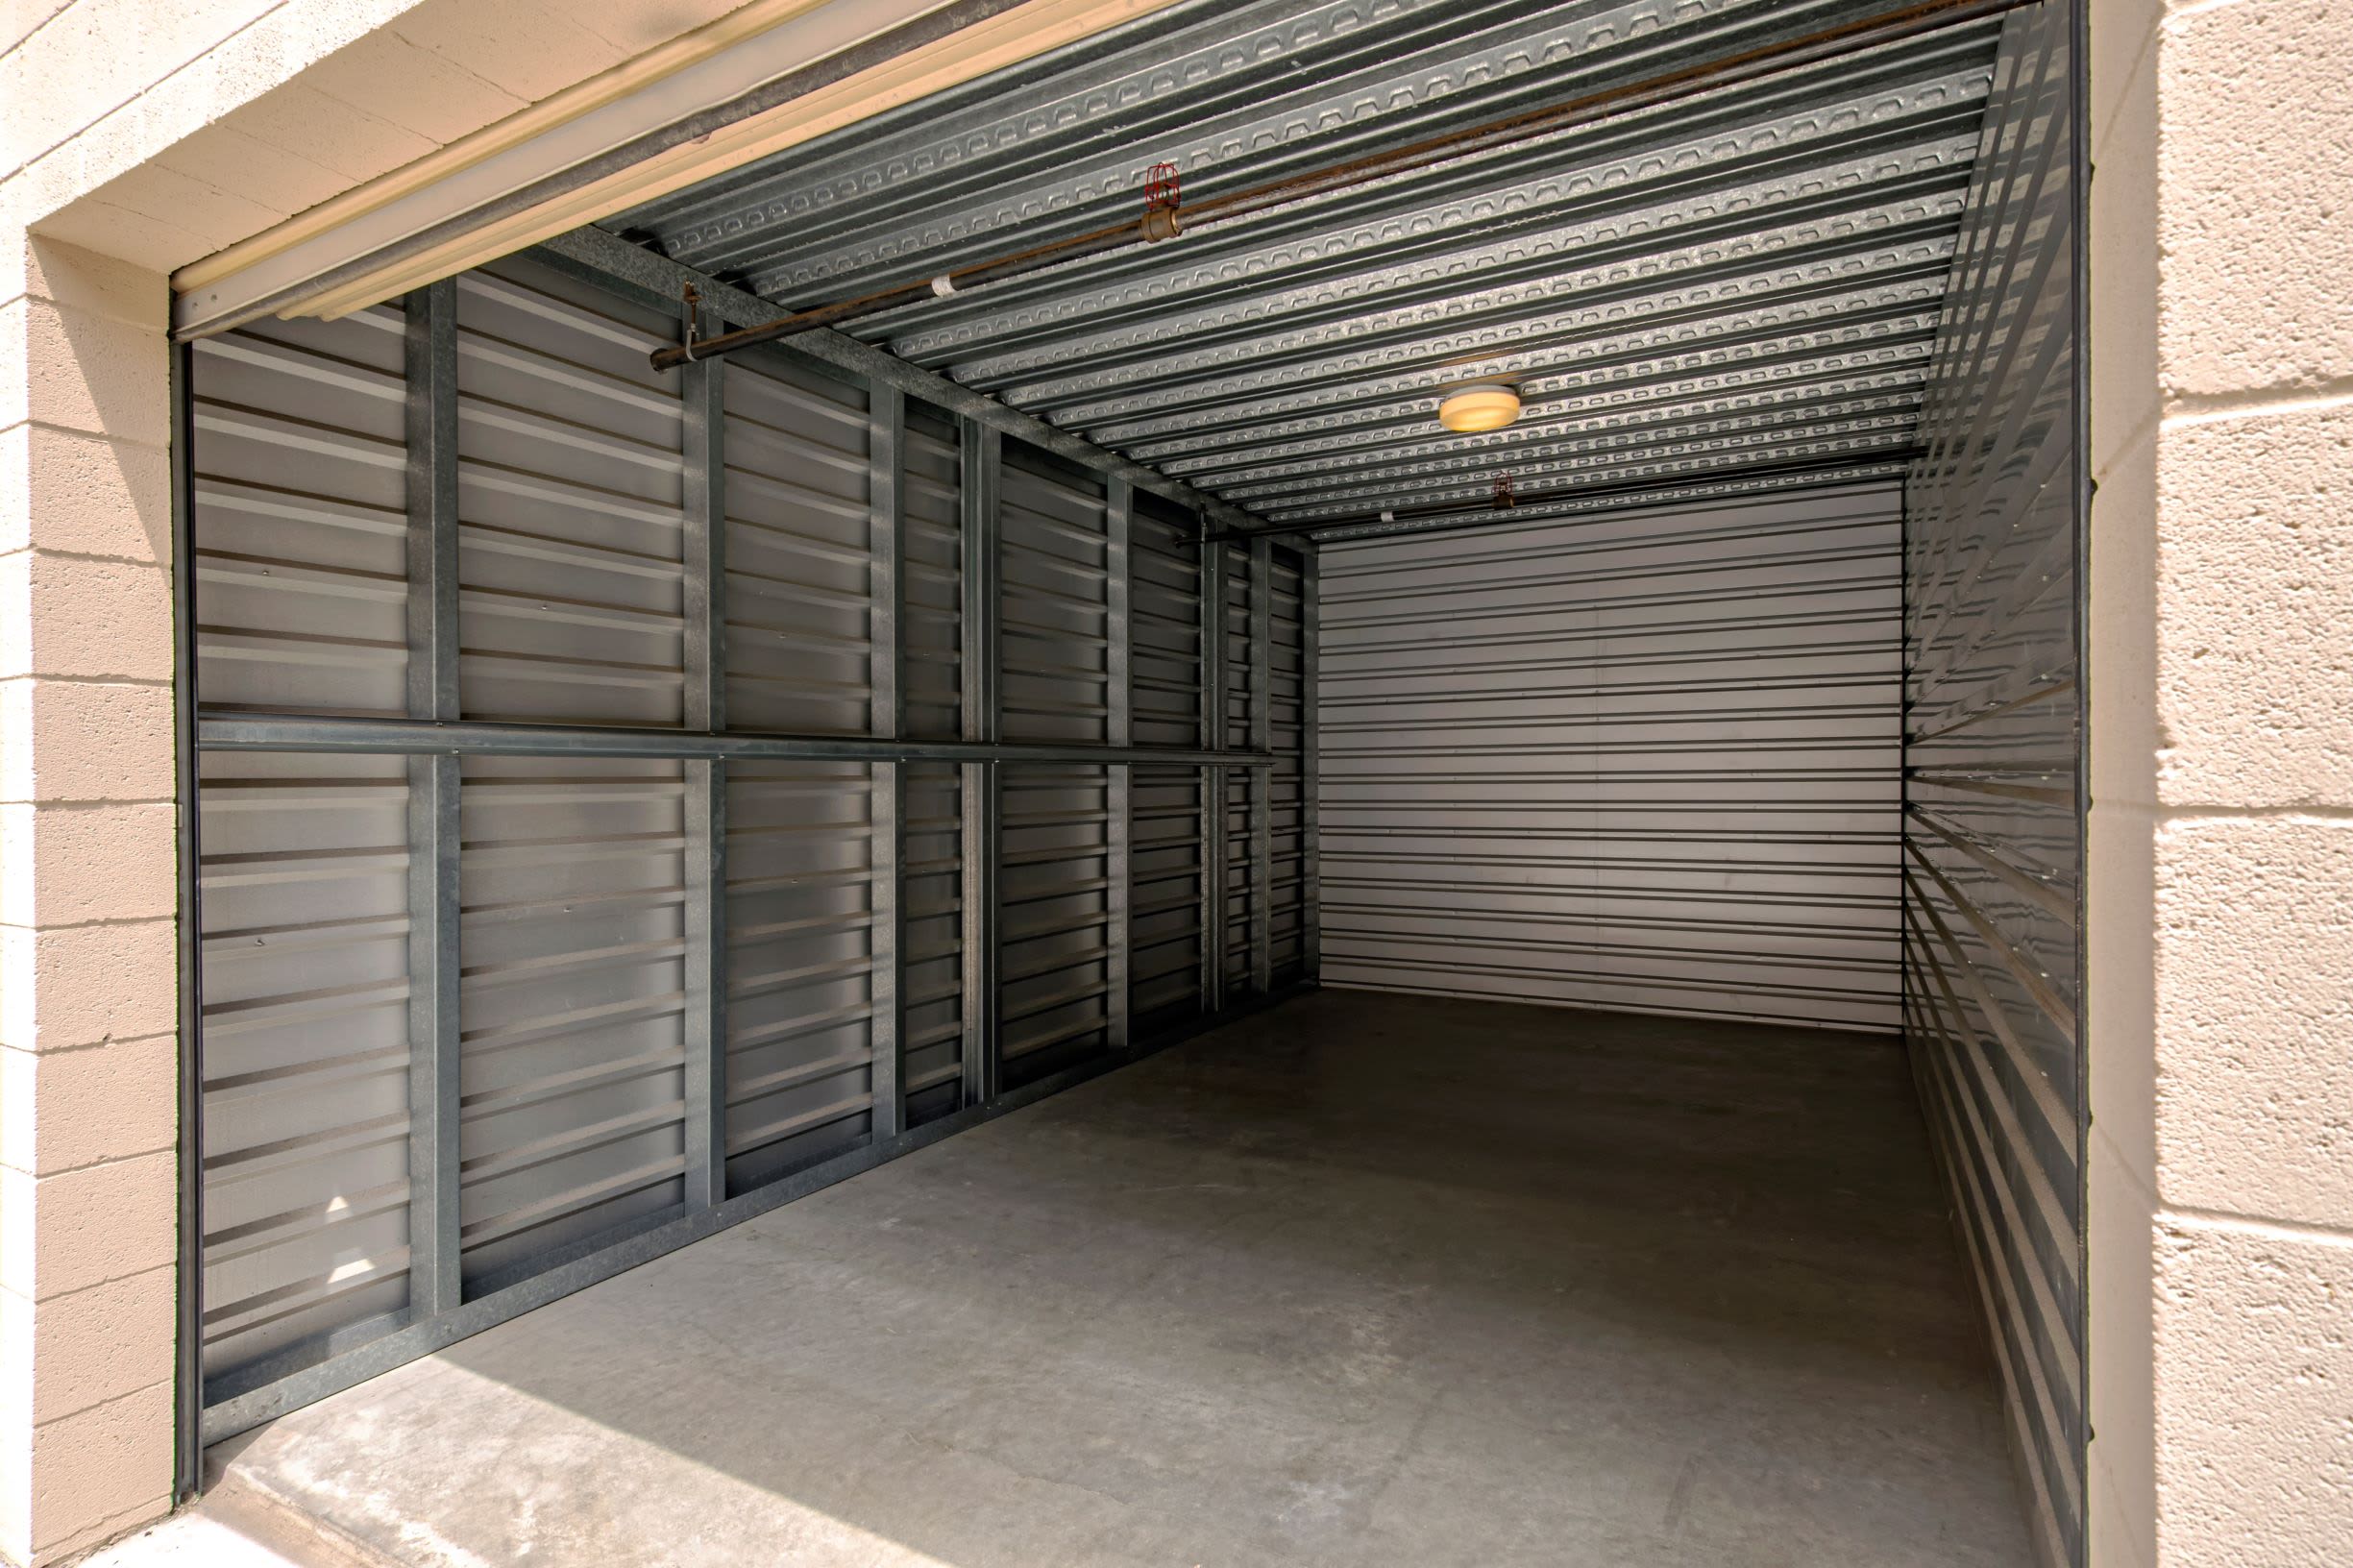 The inside of a storage unit at Smart Self Storage of Solana Beach in Solana Beach, CA